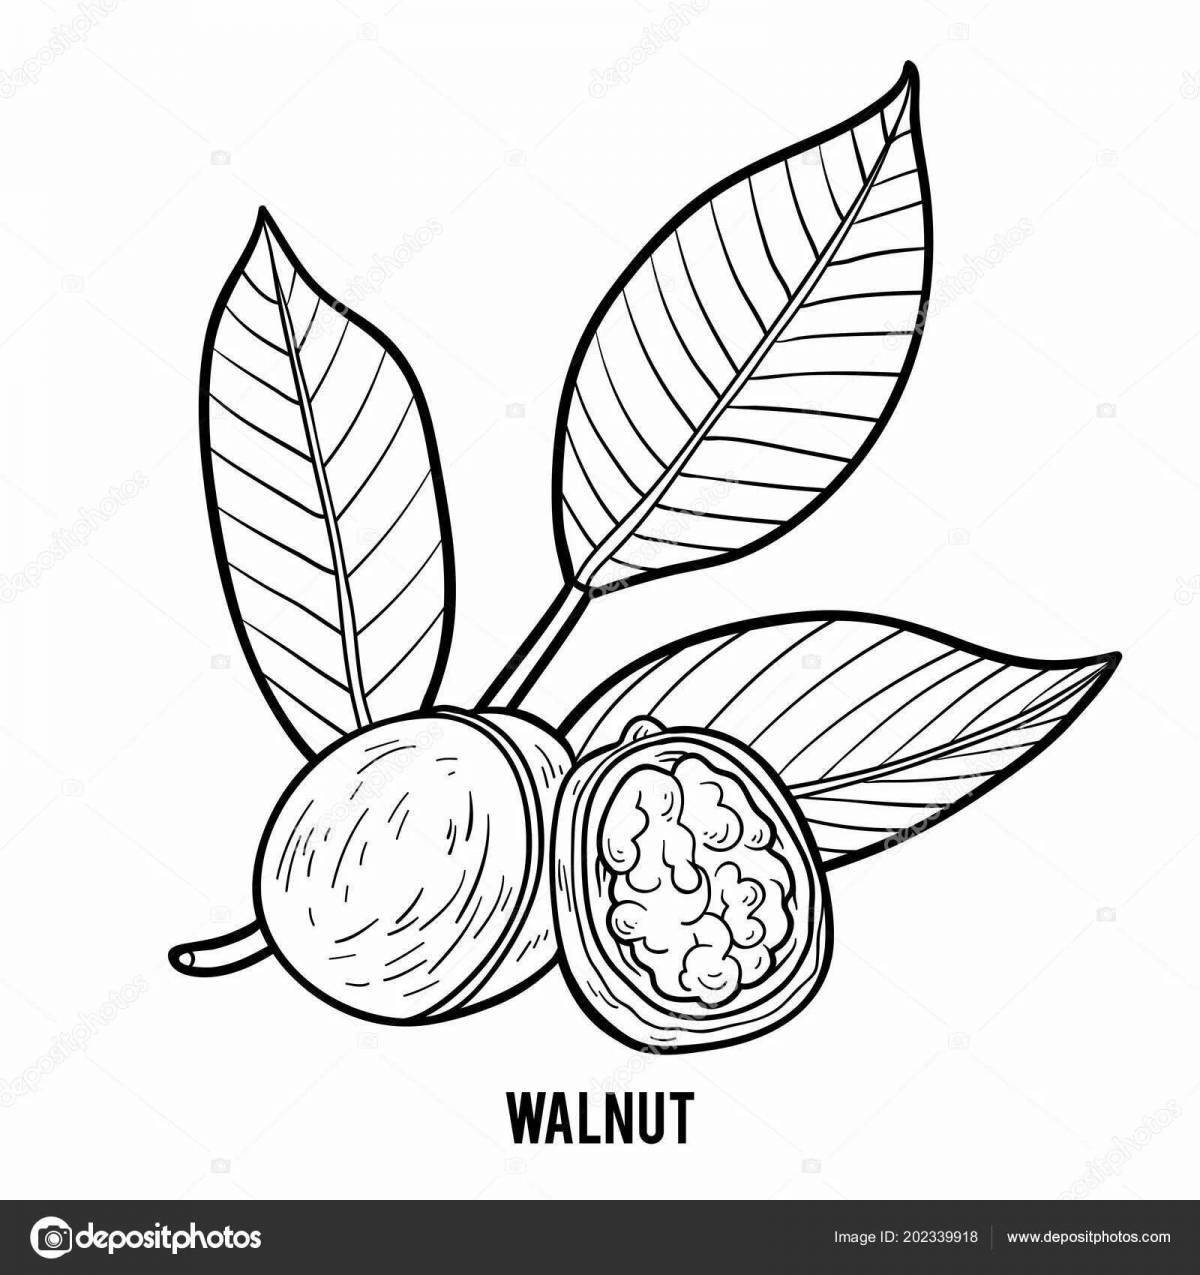 Living walnut coloring page